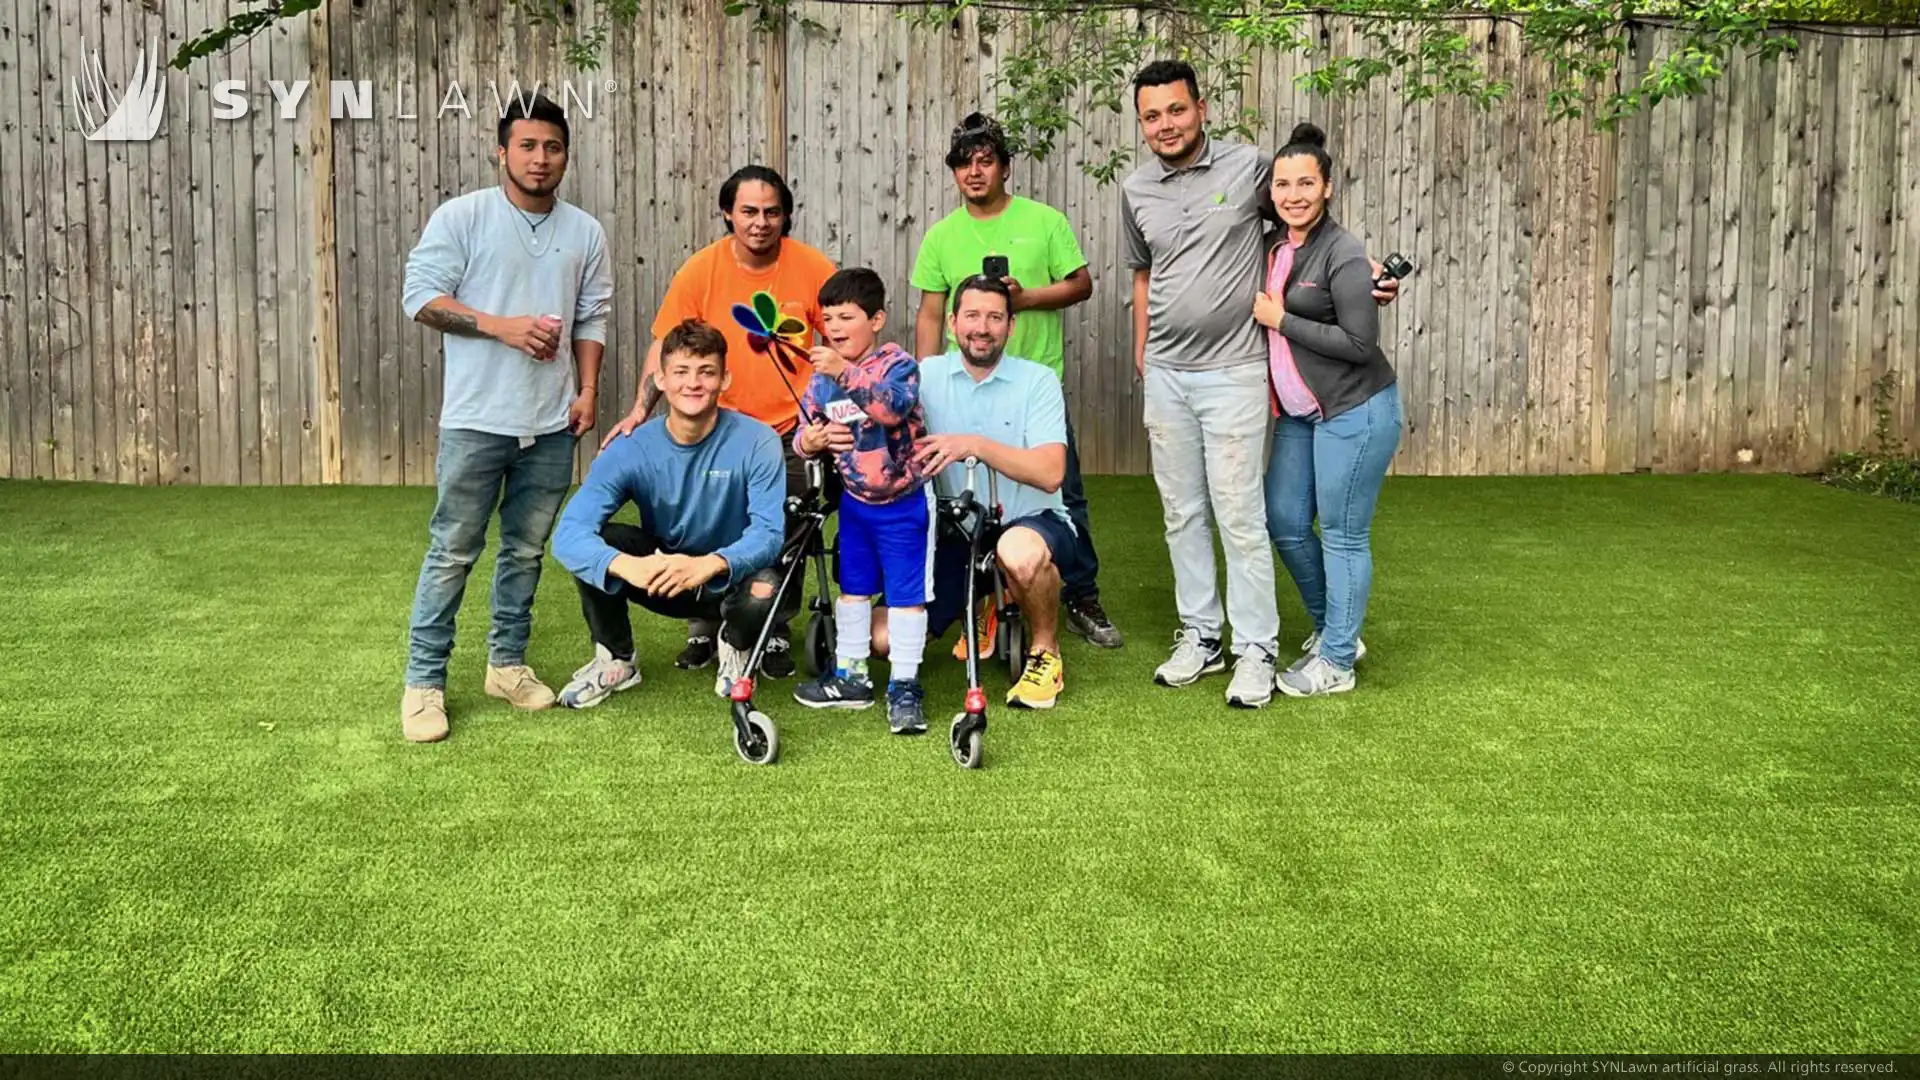 SYNLawn bouwt droomachtertuin voor Make-a-Wish-familie